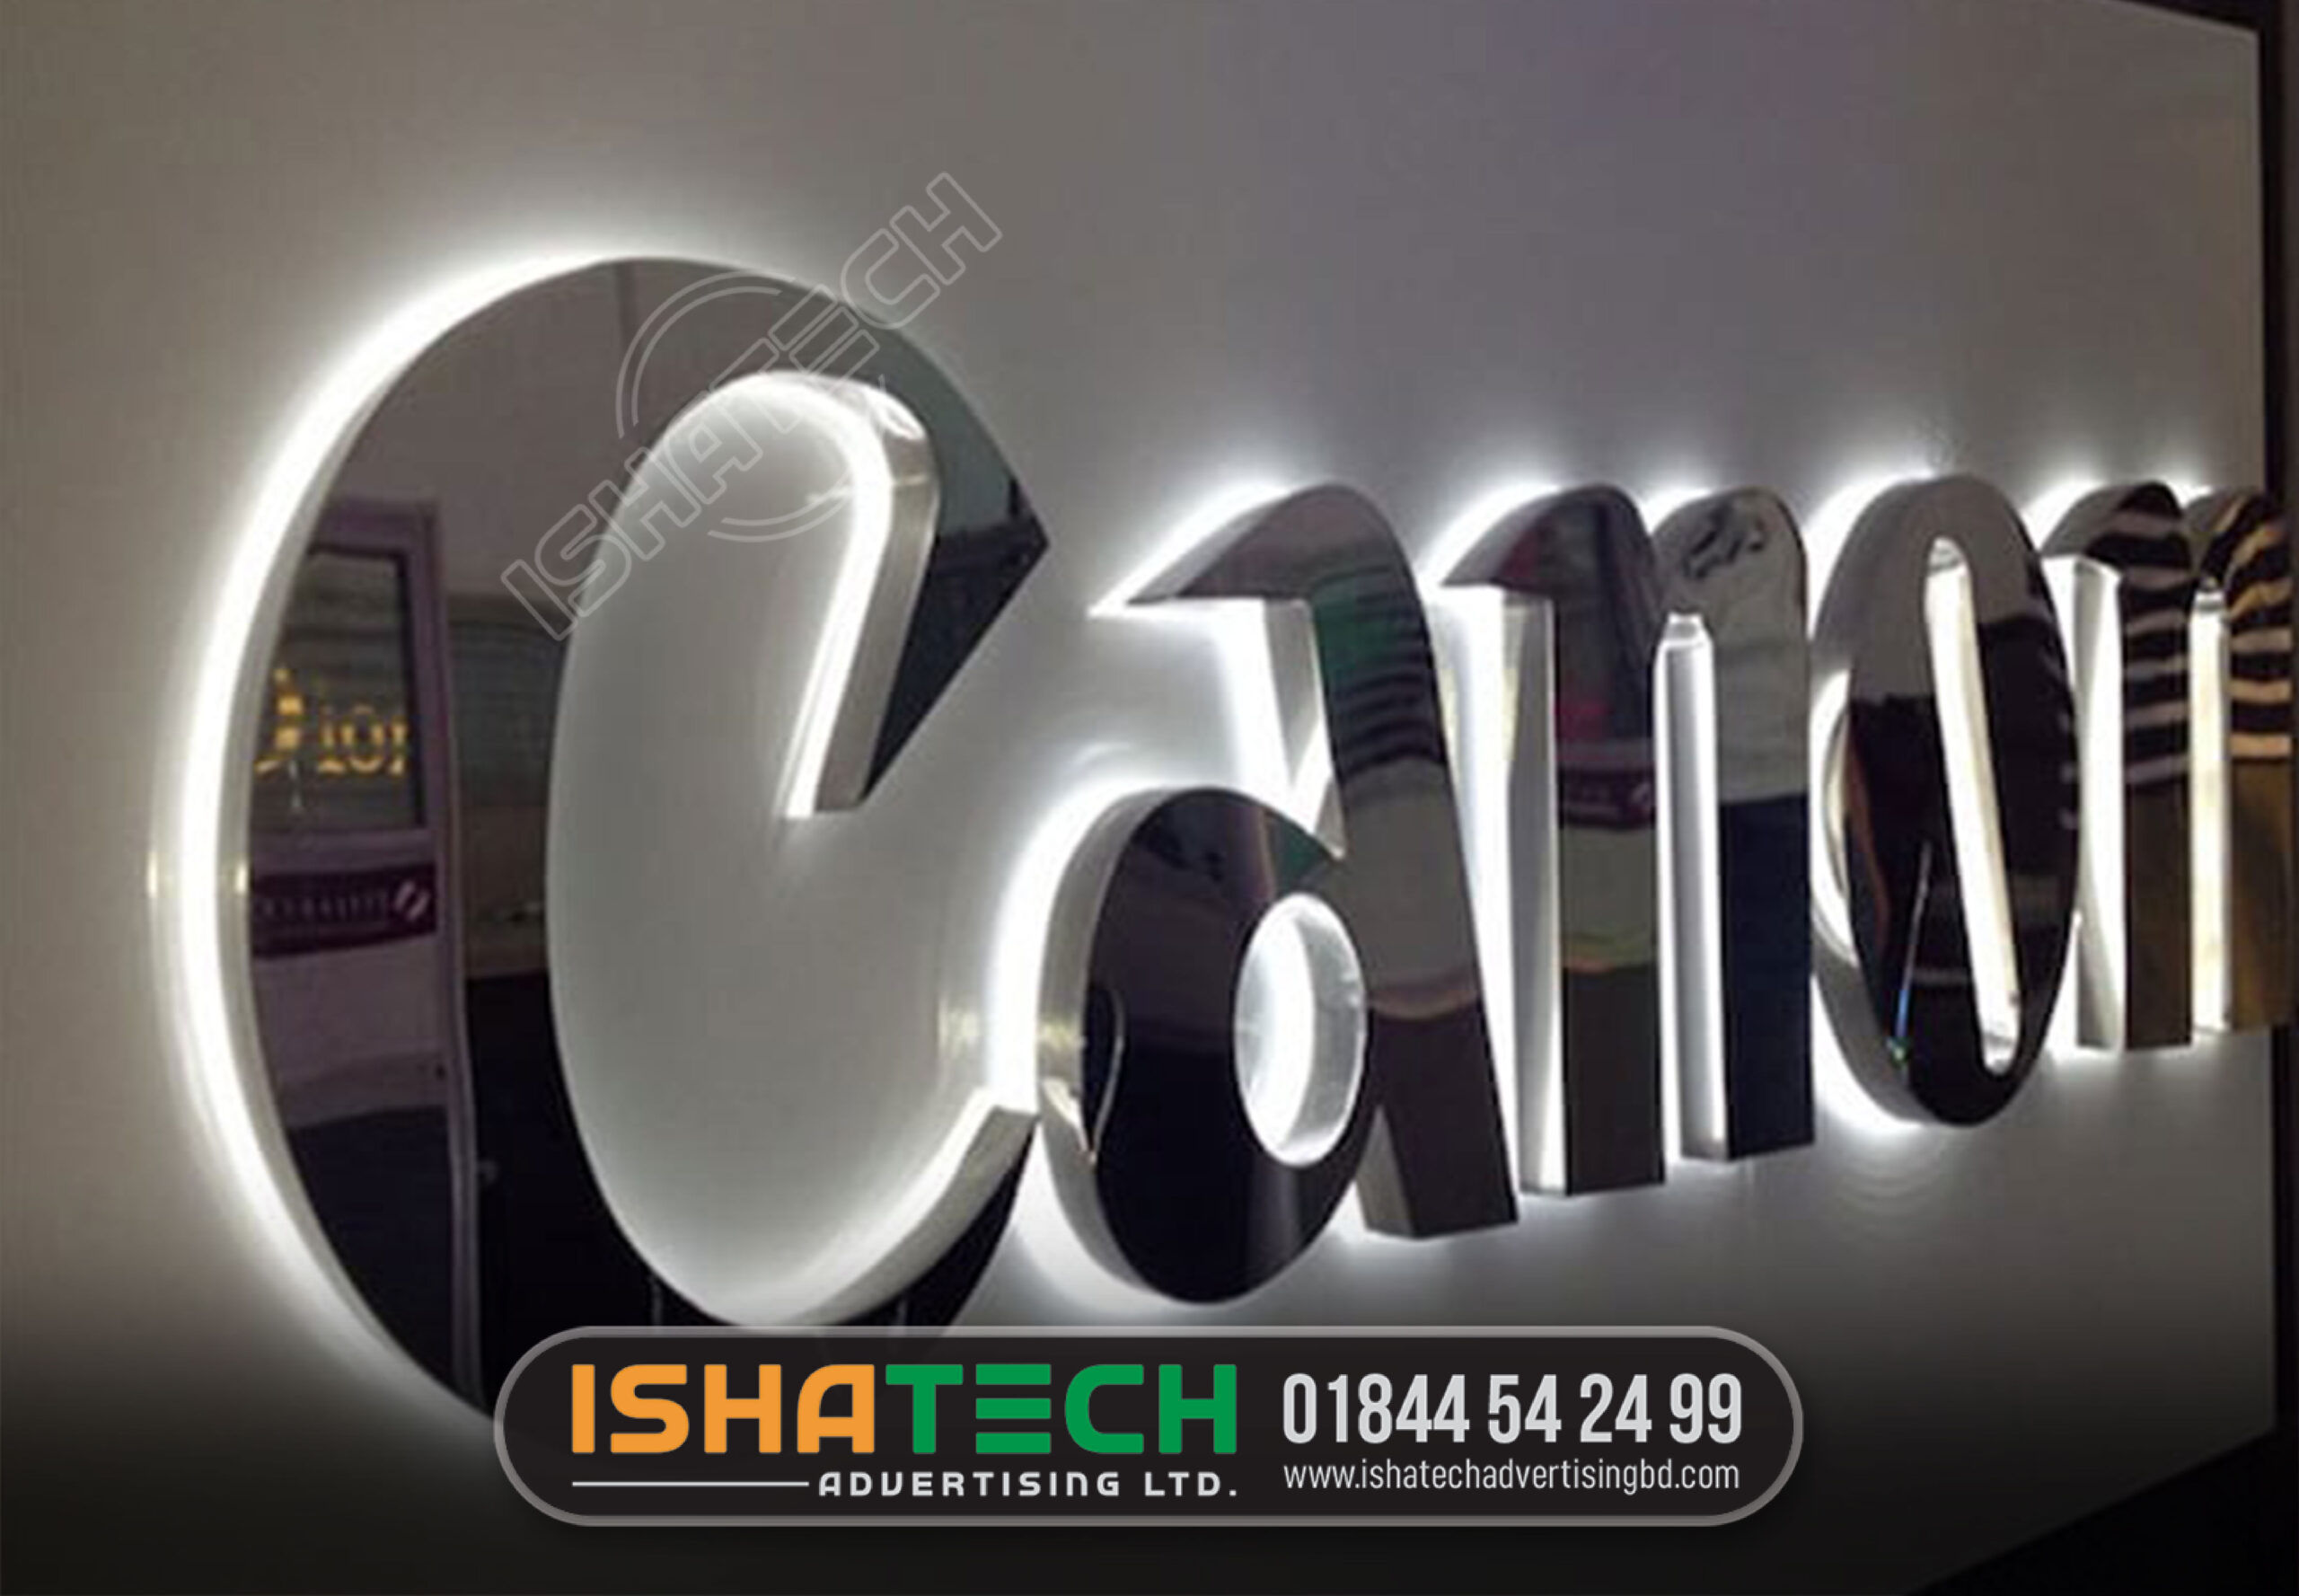 CANON CLEAR ACRYLIC LETTER SIGNAGE, LED SIGN, LETTER SIGNS, CREAR ACRYLIC